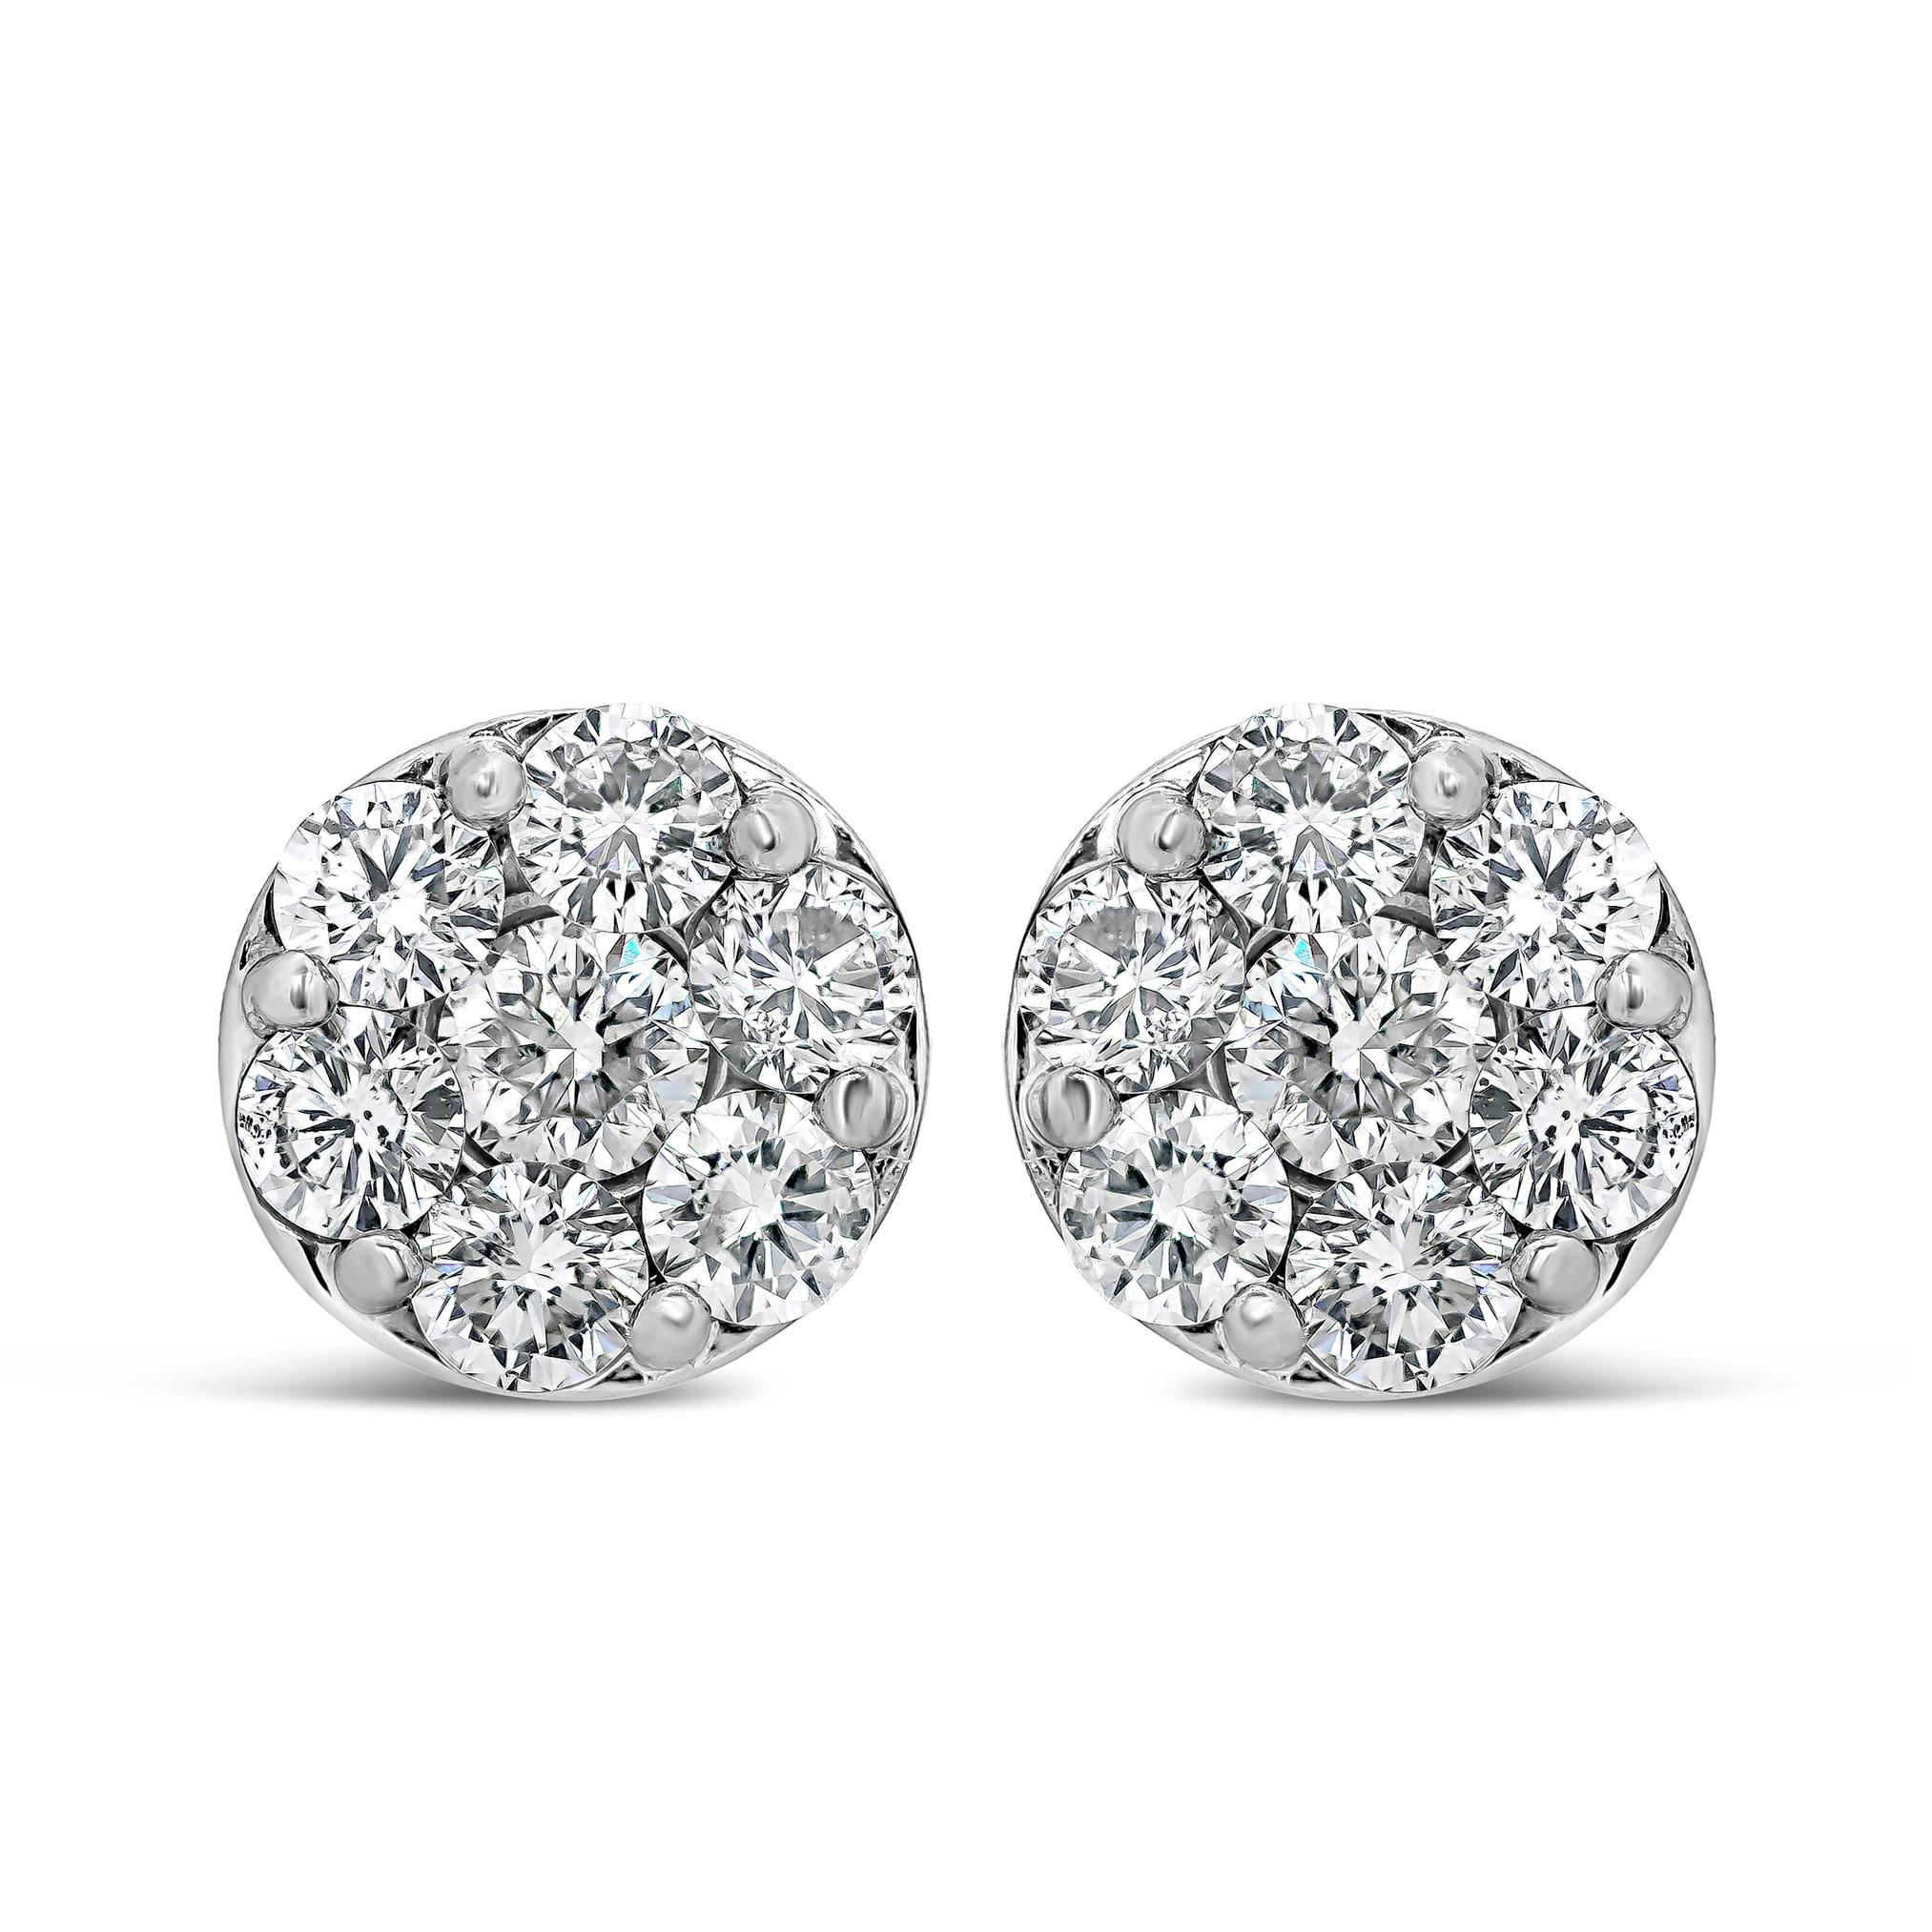 A simple and chic stud earrings showcasing seven round brilliant diamonds set in a cluster design. Composition made in 18K White Gold and Platinum. Diamonds weigh 1.75 carats total.

Roman Malakov is a custom house, specializing in creating anything